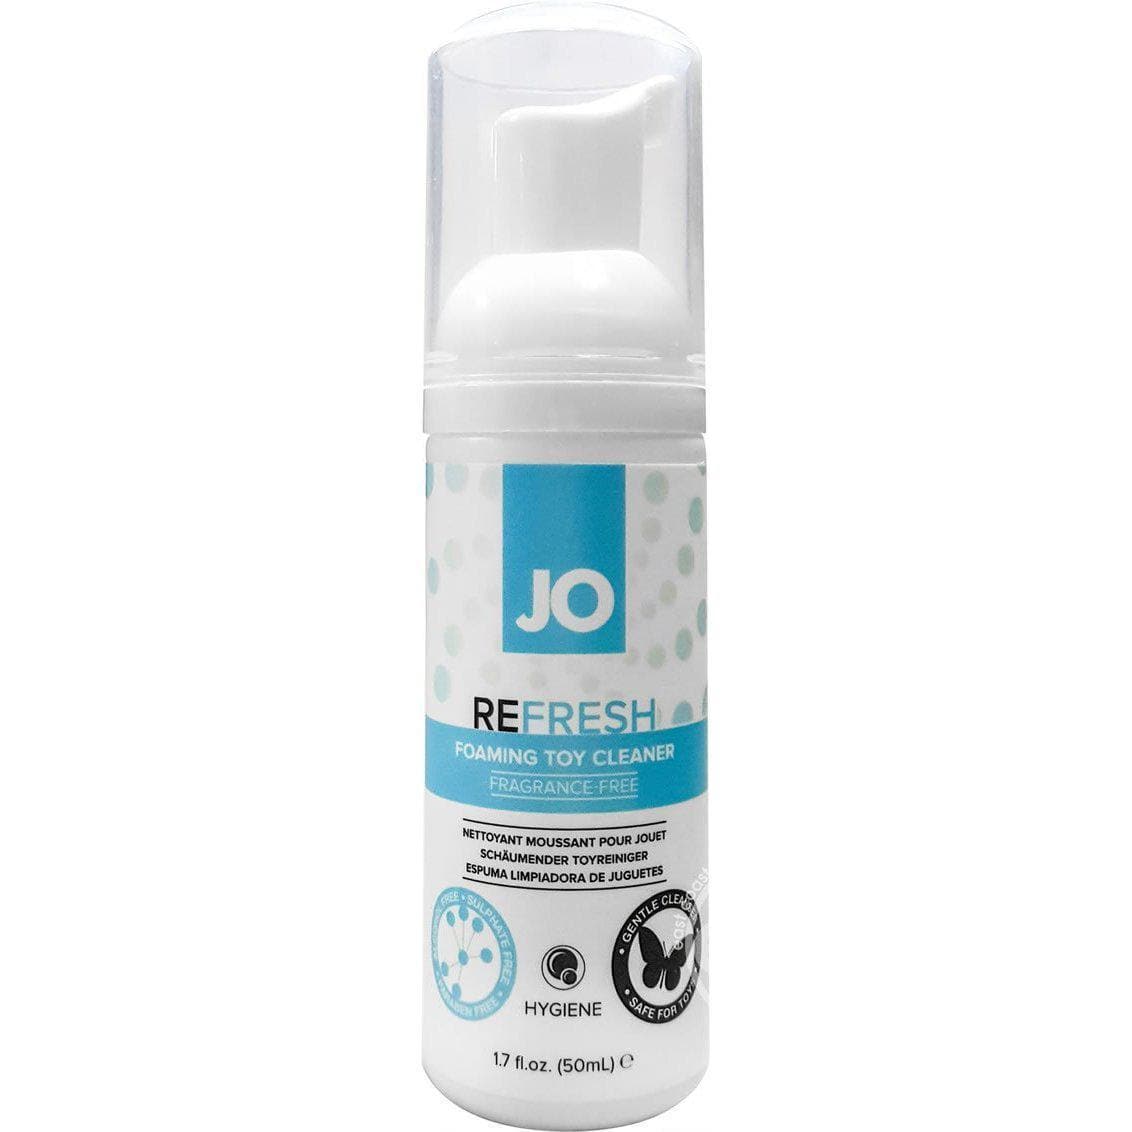 JO Refresh Foaming Toy Cleaner Fragrance Free - Romantic Blessings